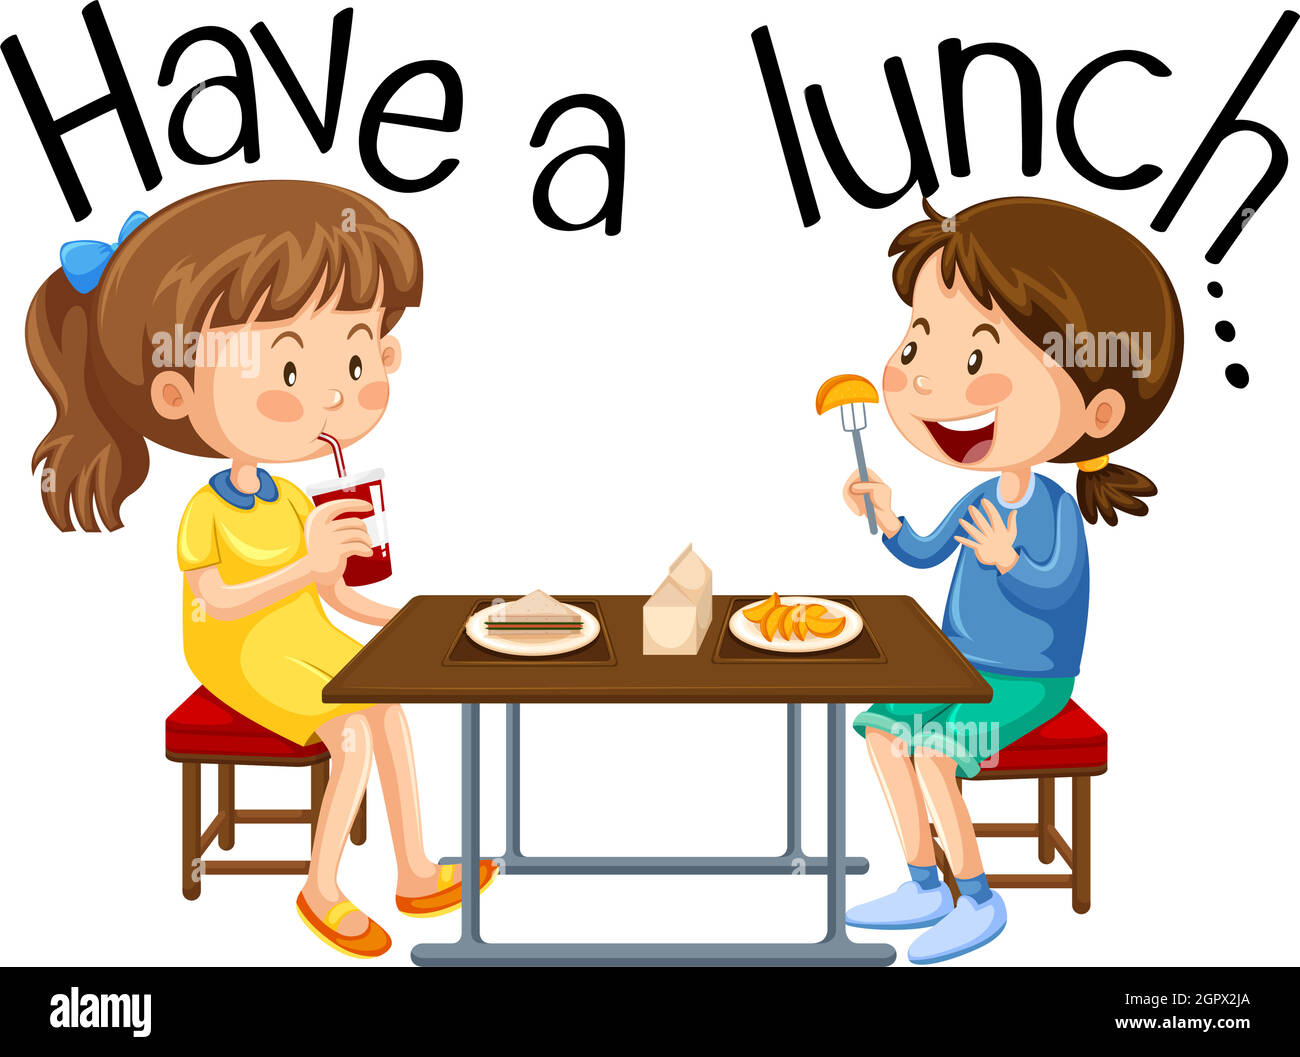 I have lunch. Lunch cartoon. Have lunch vector face картинка для детей. Клипарт have lunch. I can have lunch